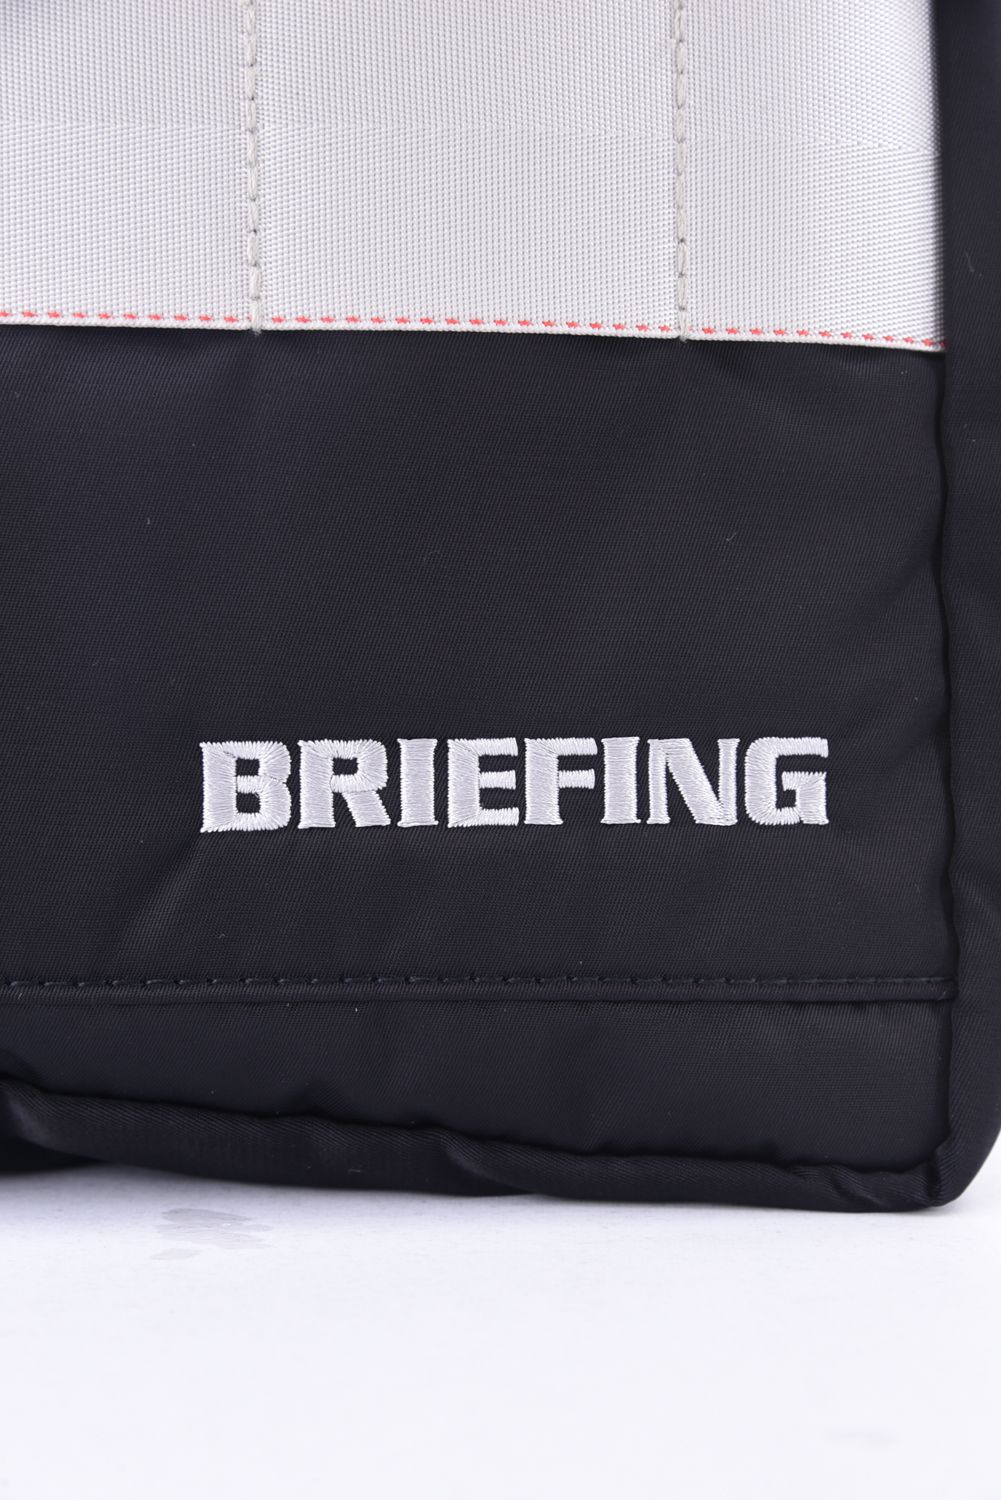 BRIEFING - 【HOLIDAY COLLECTION】 CART TOTE HOLIDAY / カートトート 